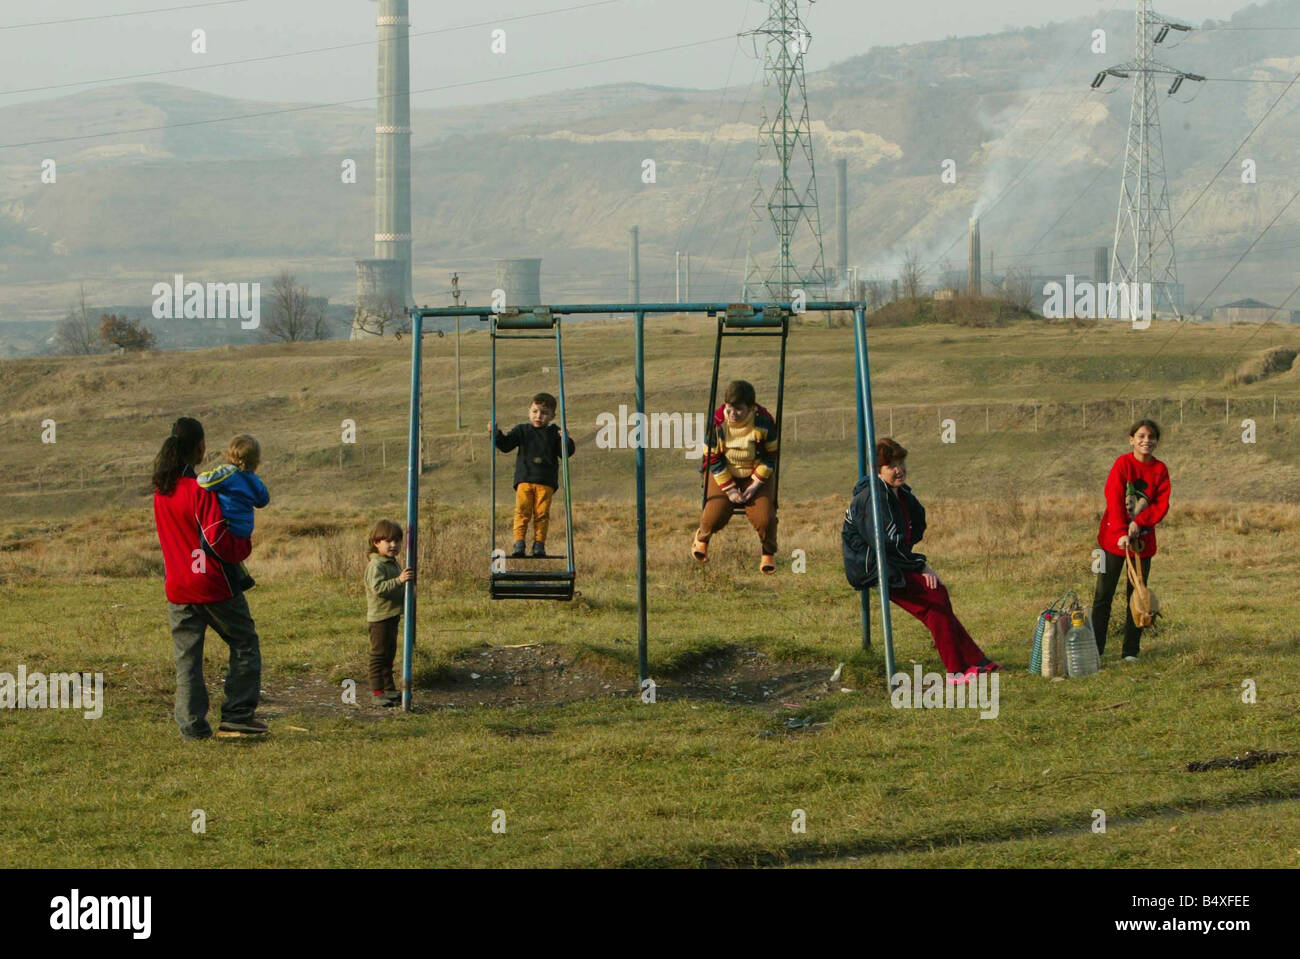 Copsa Mica Romania November 2006 Copsa Mica Europe s most polluted place children play on the swings above the smelting factory Stock Photo